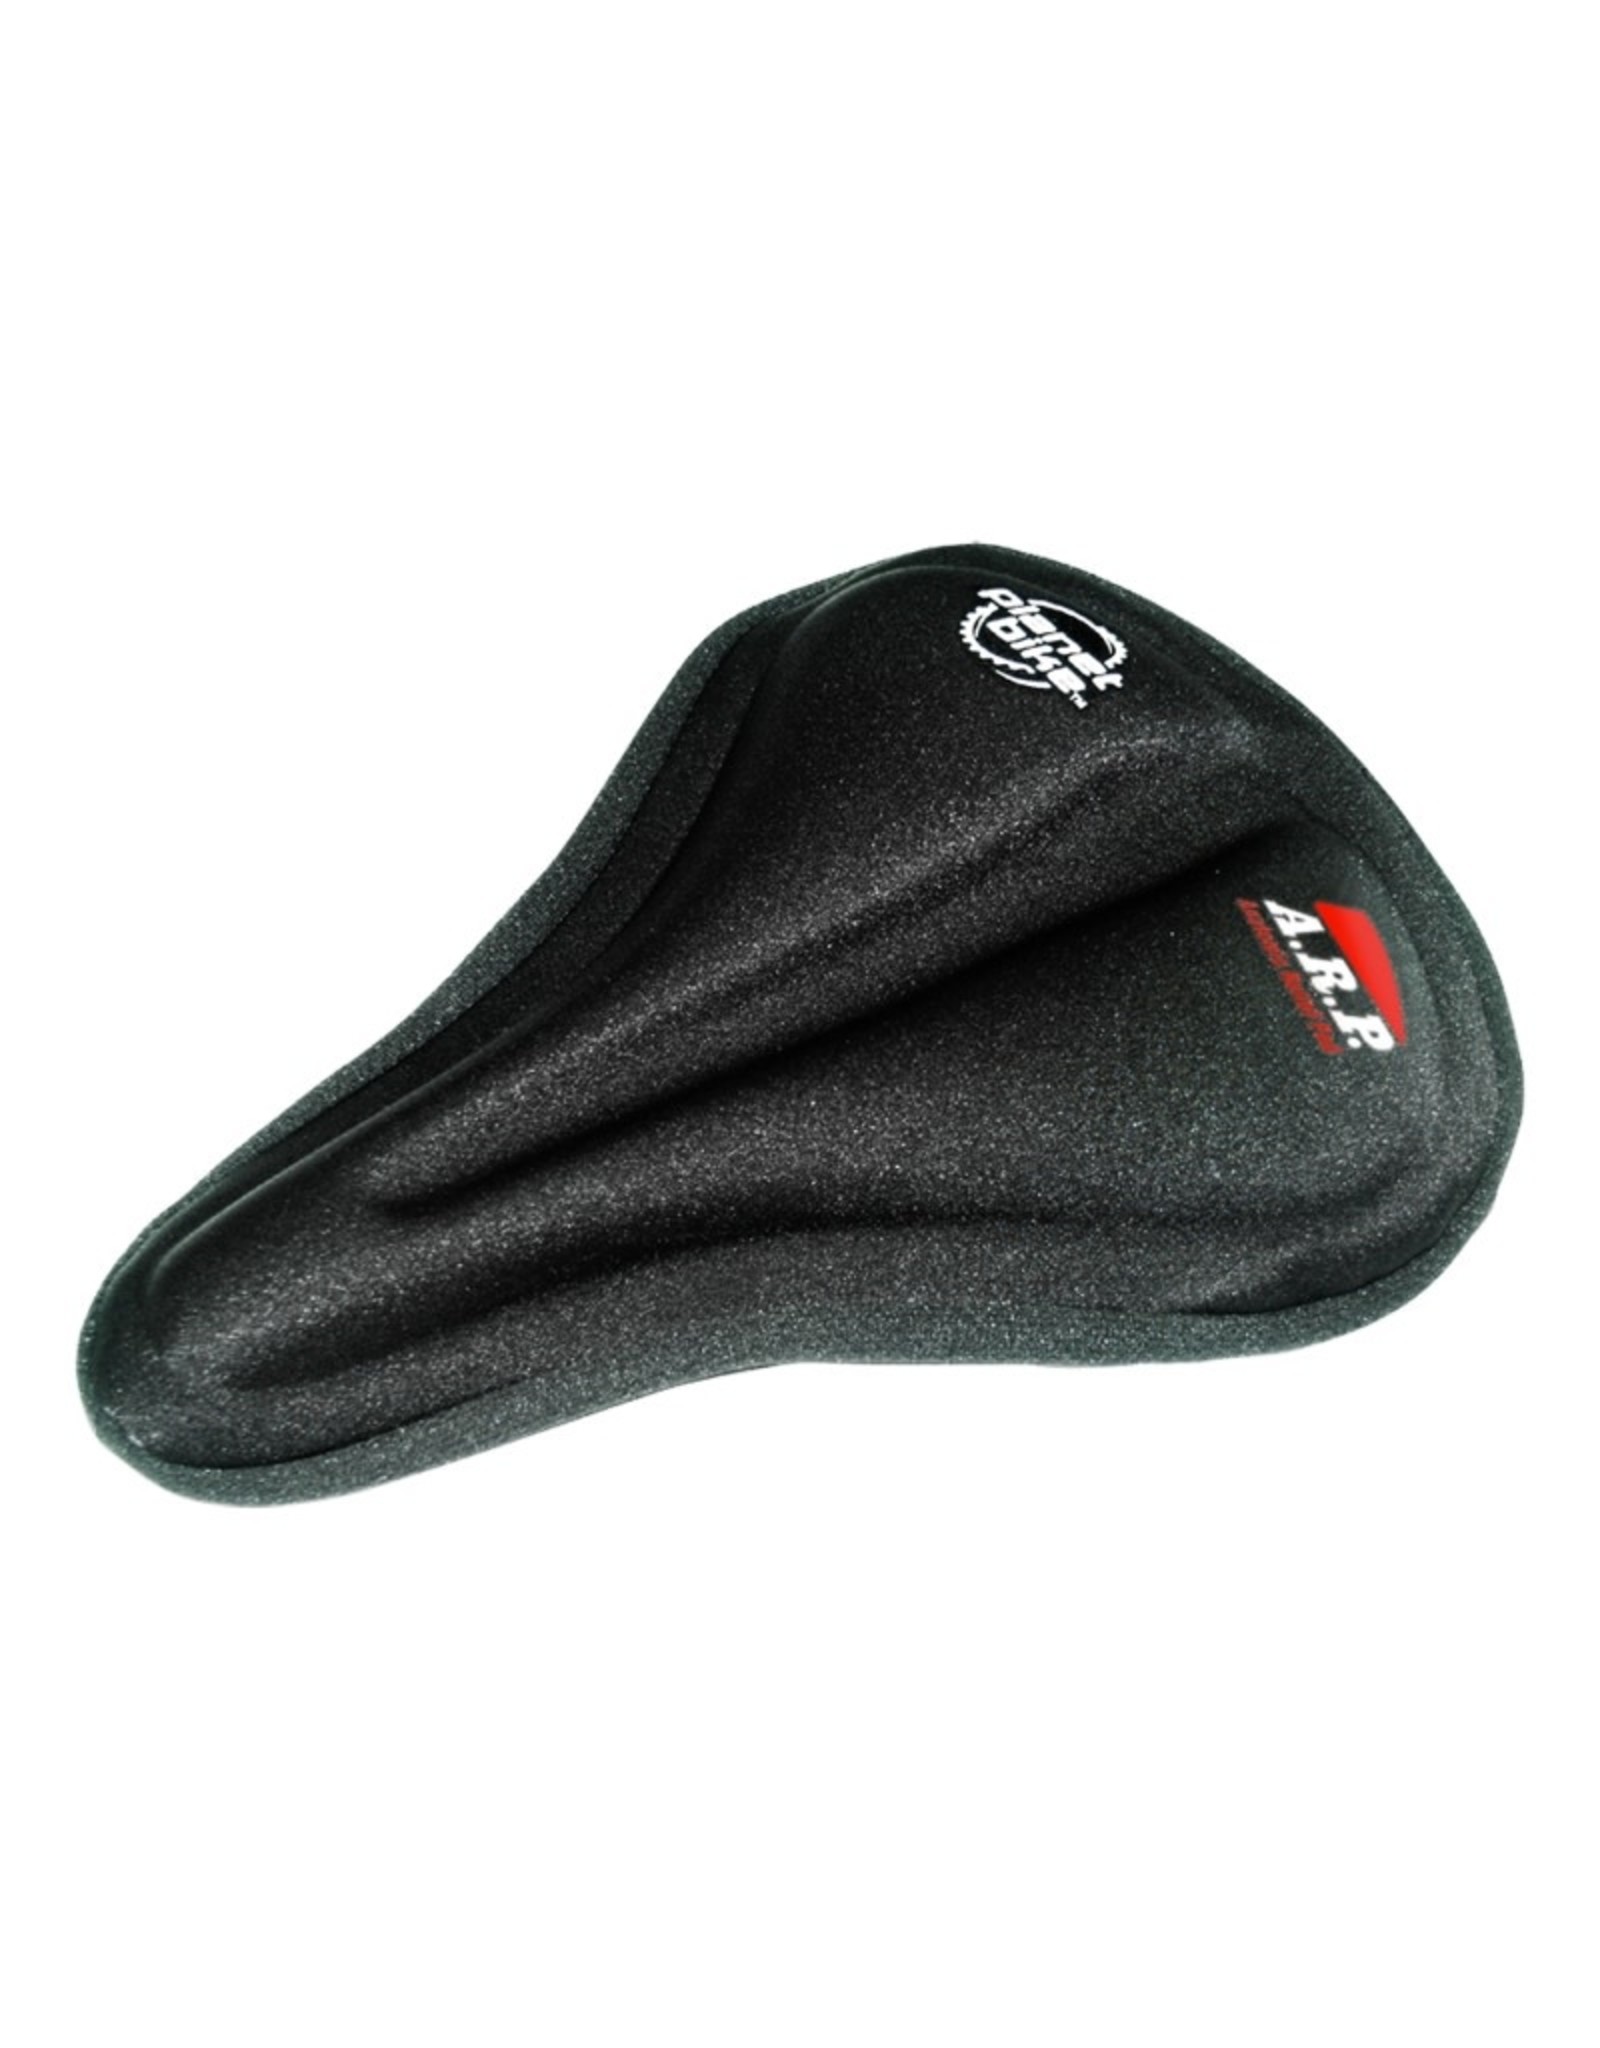 Planet Bike Planet Bike A.R.P. Anotomic Relief Pad Seat Cover MTB 11x7.9"